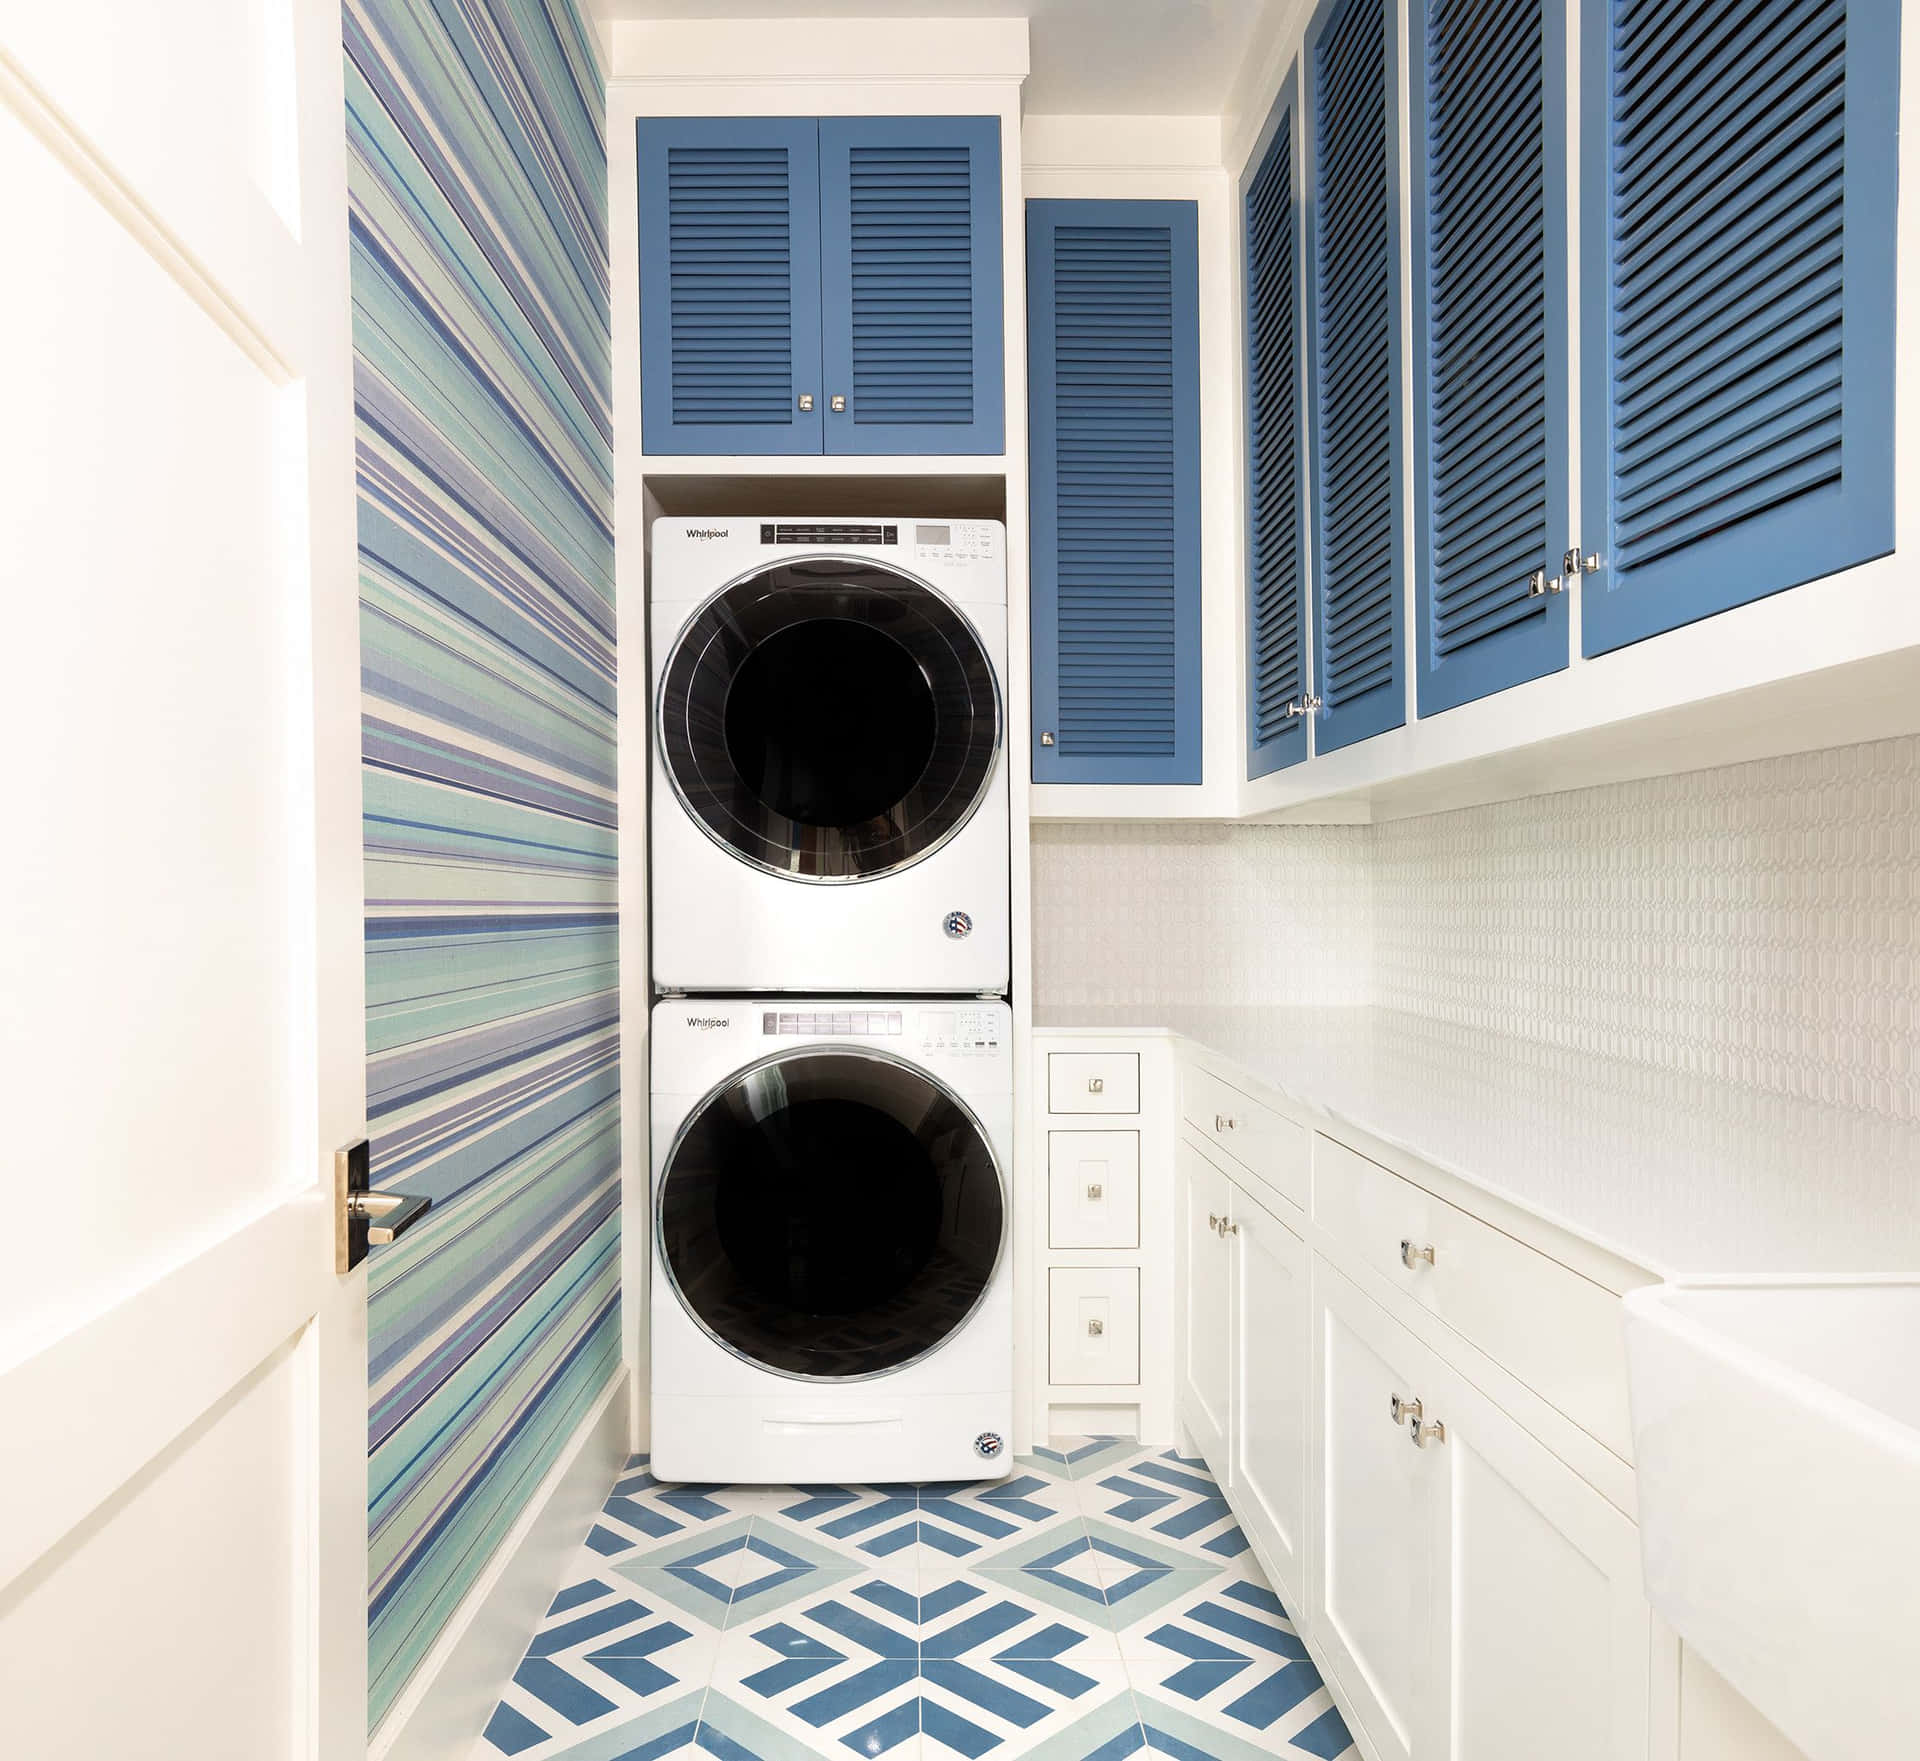 Download Laundry Room Pictures | Wallpapers.com